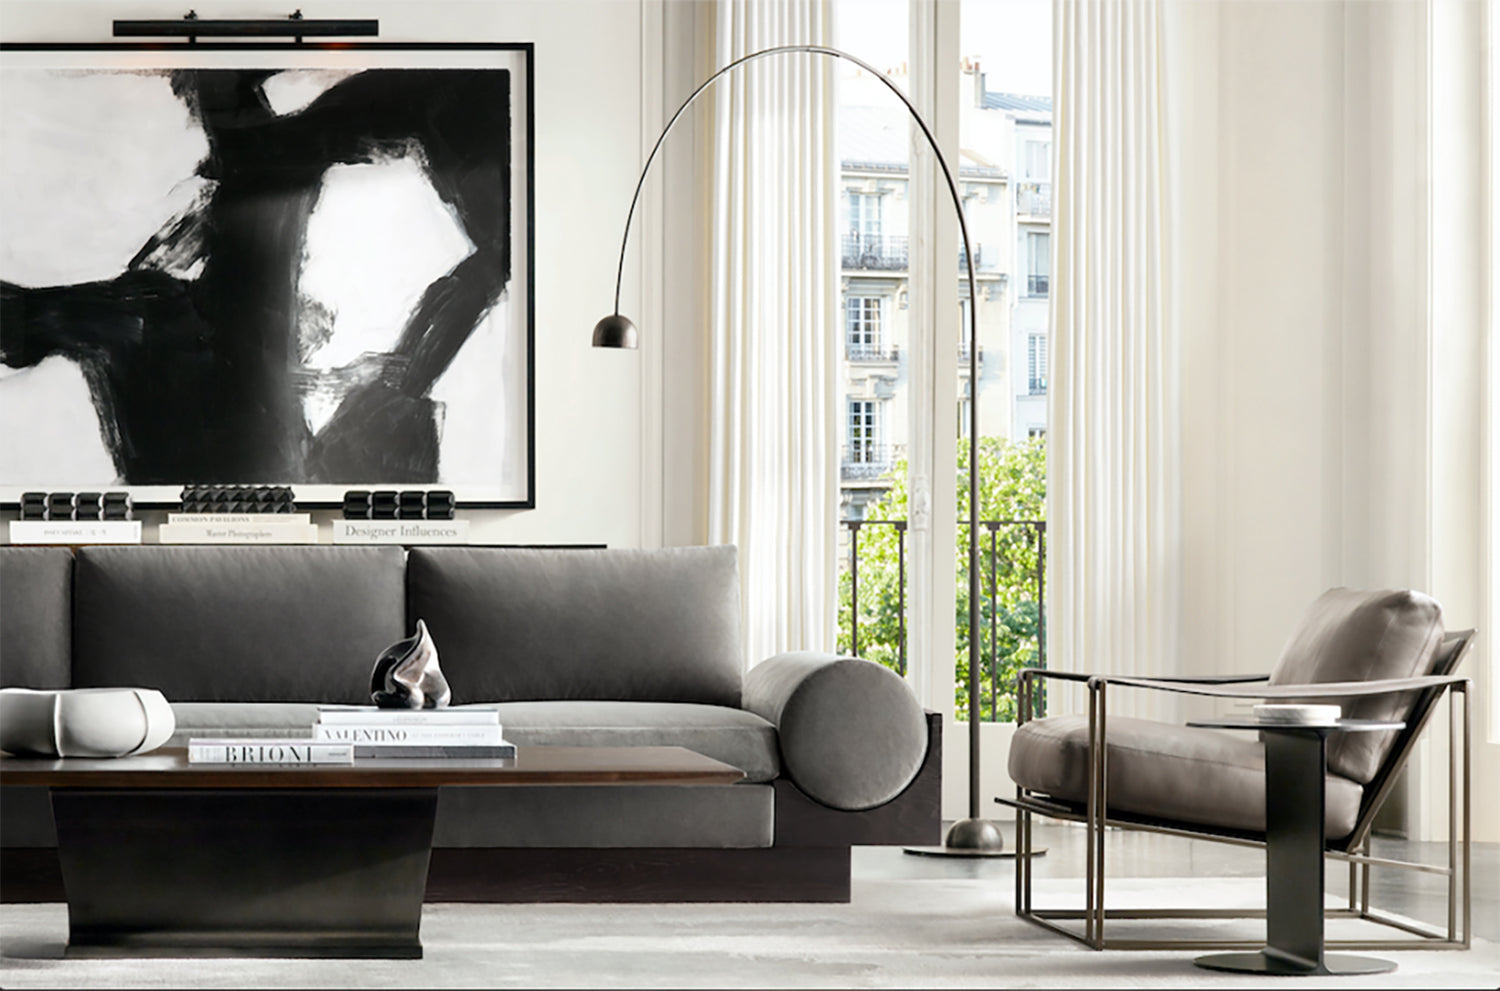 A modern living room featuring a grey sofa, wooden coffee table with books and decor, and a metal-framed armchair. A black and white abstract painting hangs on the wall, and a floor-to-ceiling window with white sheer curtains offers a view of buildings outside.